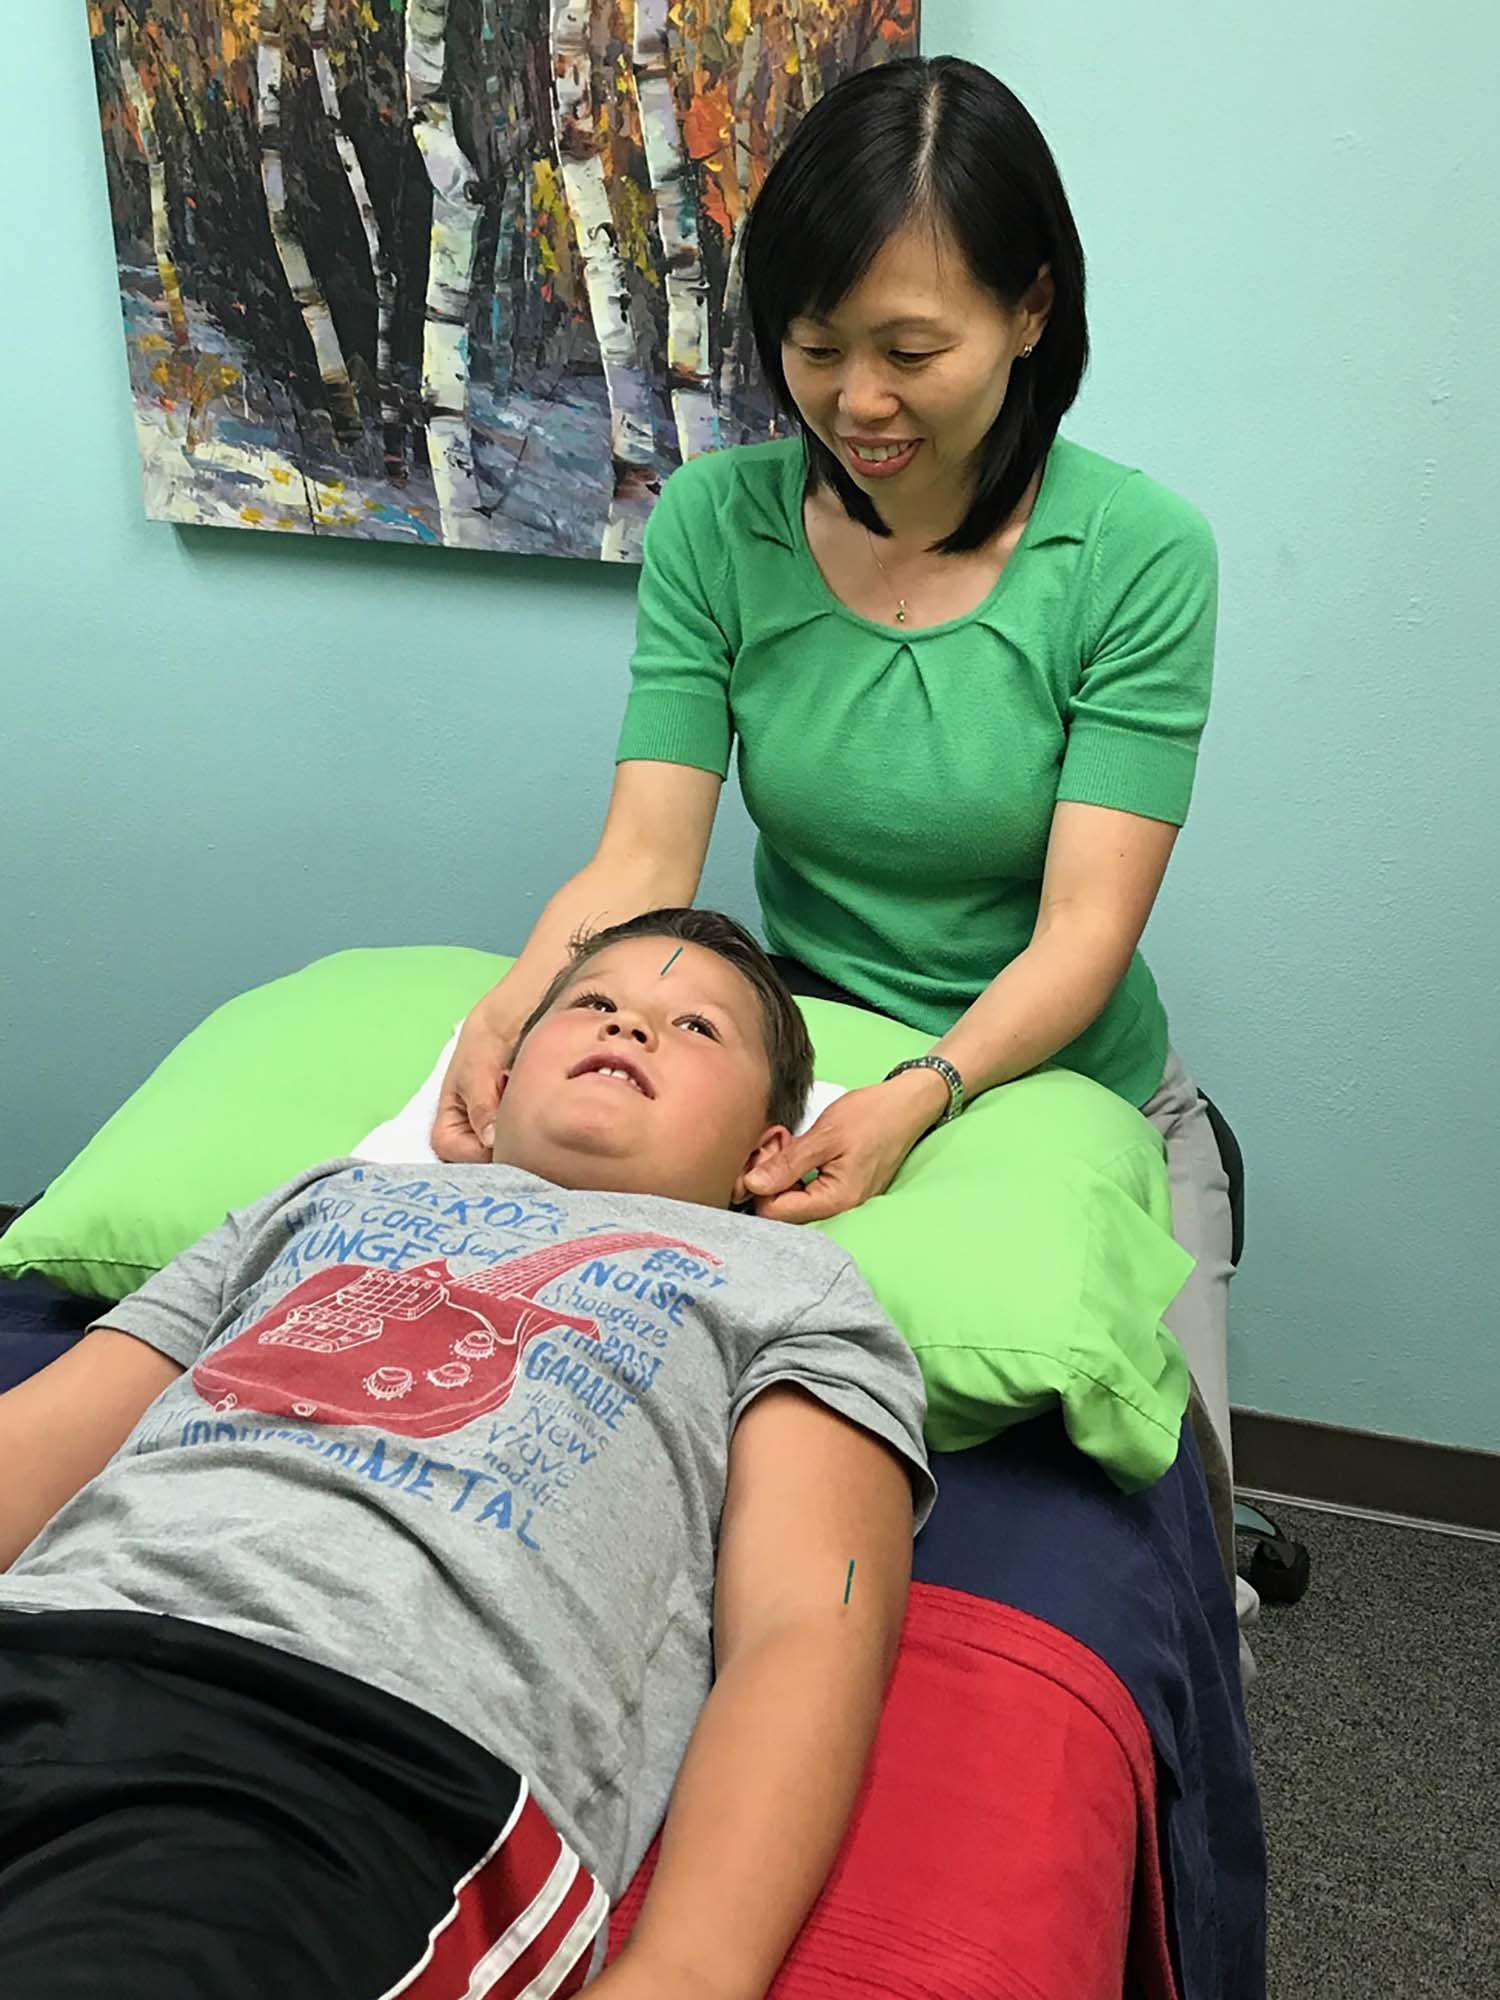 Dr. Iong Performing Acupuncture on a Child